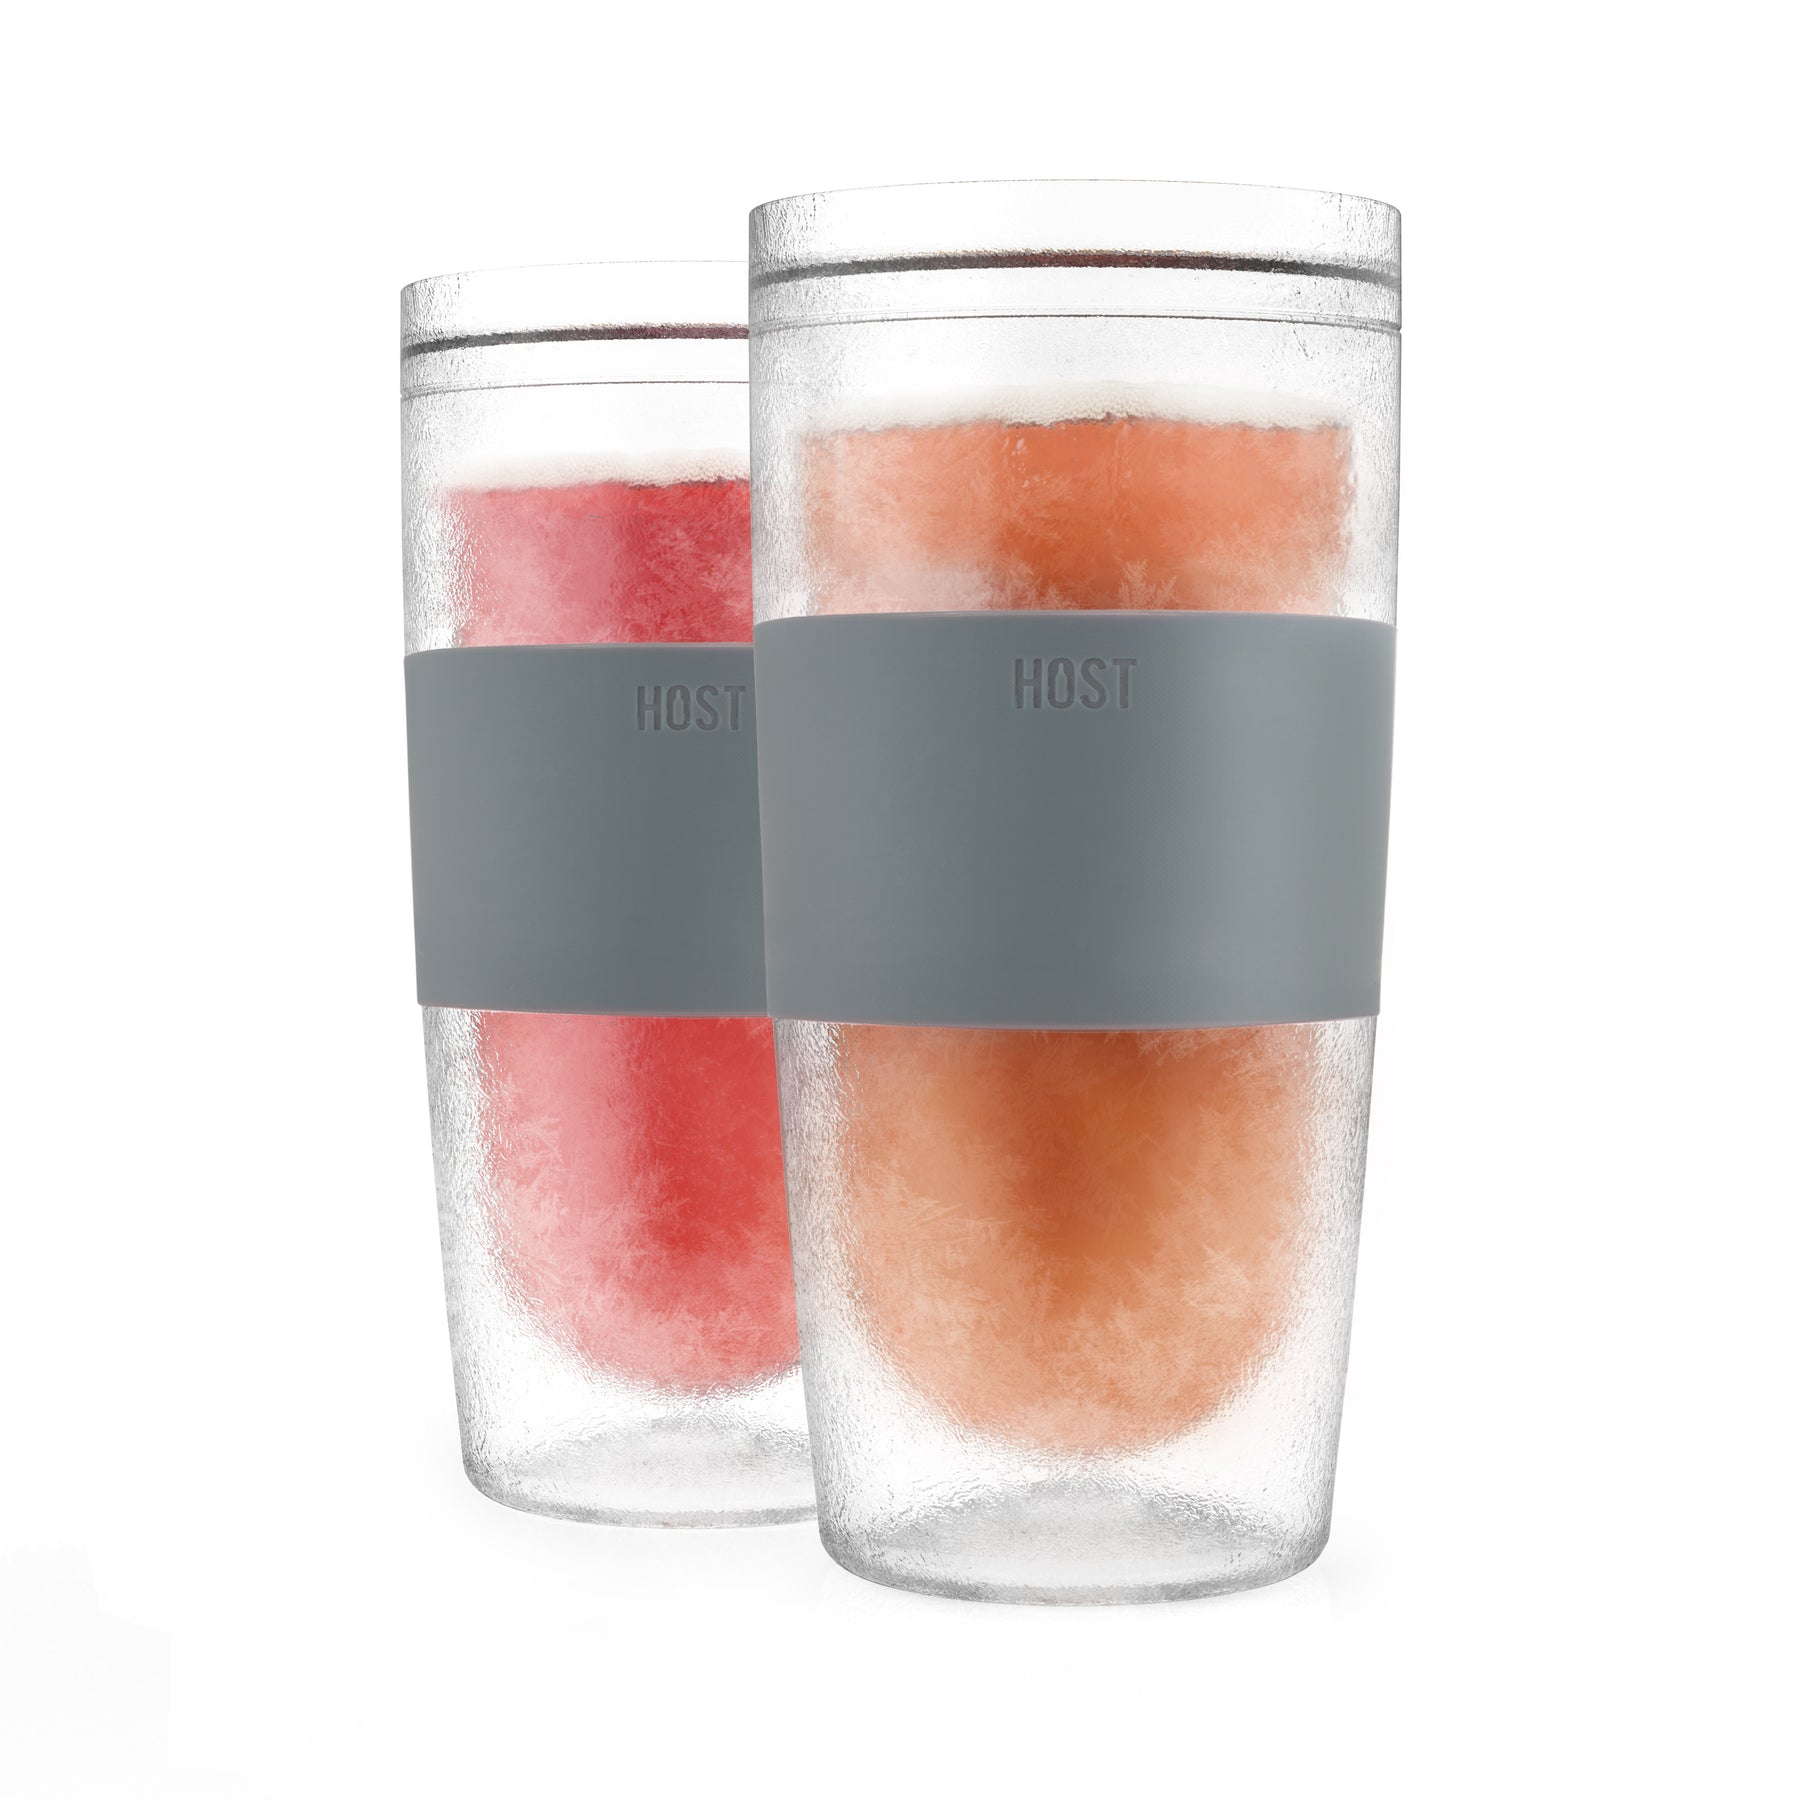 Host Freeze Beer Glasses, 16 ounce Freezer Chiller Double Wall Plastic  Frozen Pint Glass, Set of 2, Gray